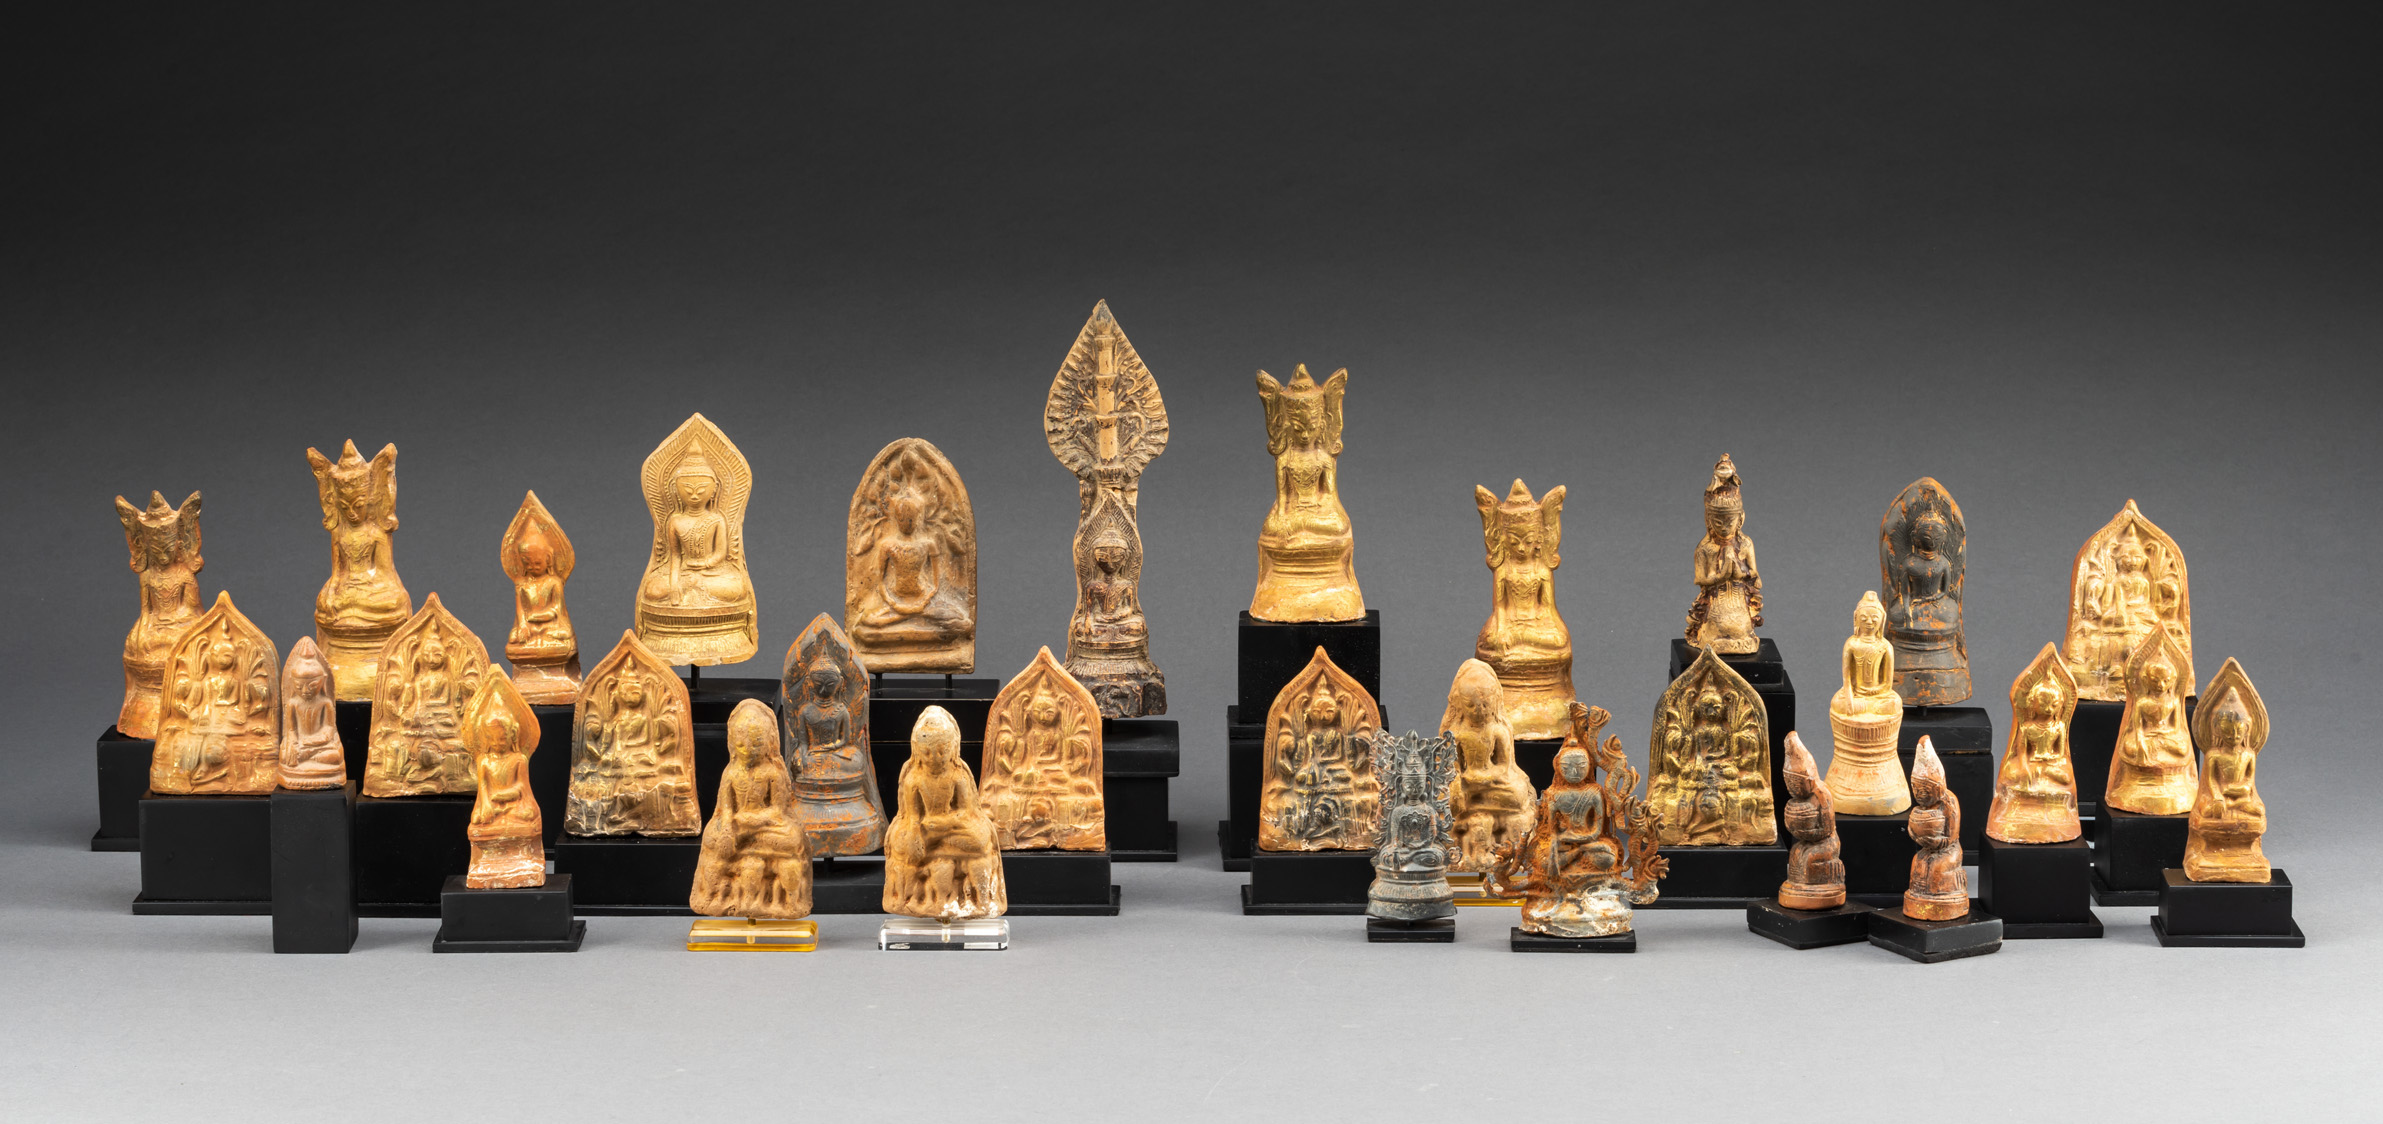 A Collection of 58 Clay & Metal Buddhist Votives Burma Myanmar,18th -19th Century